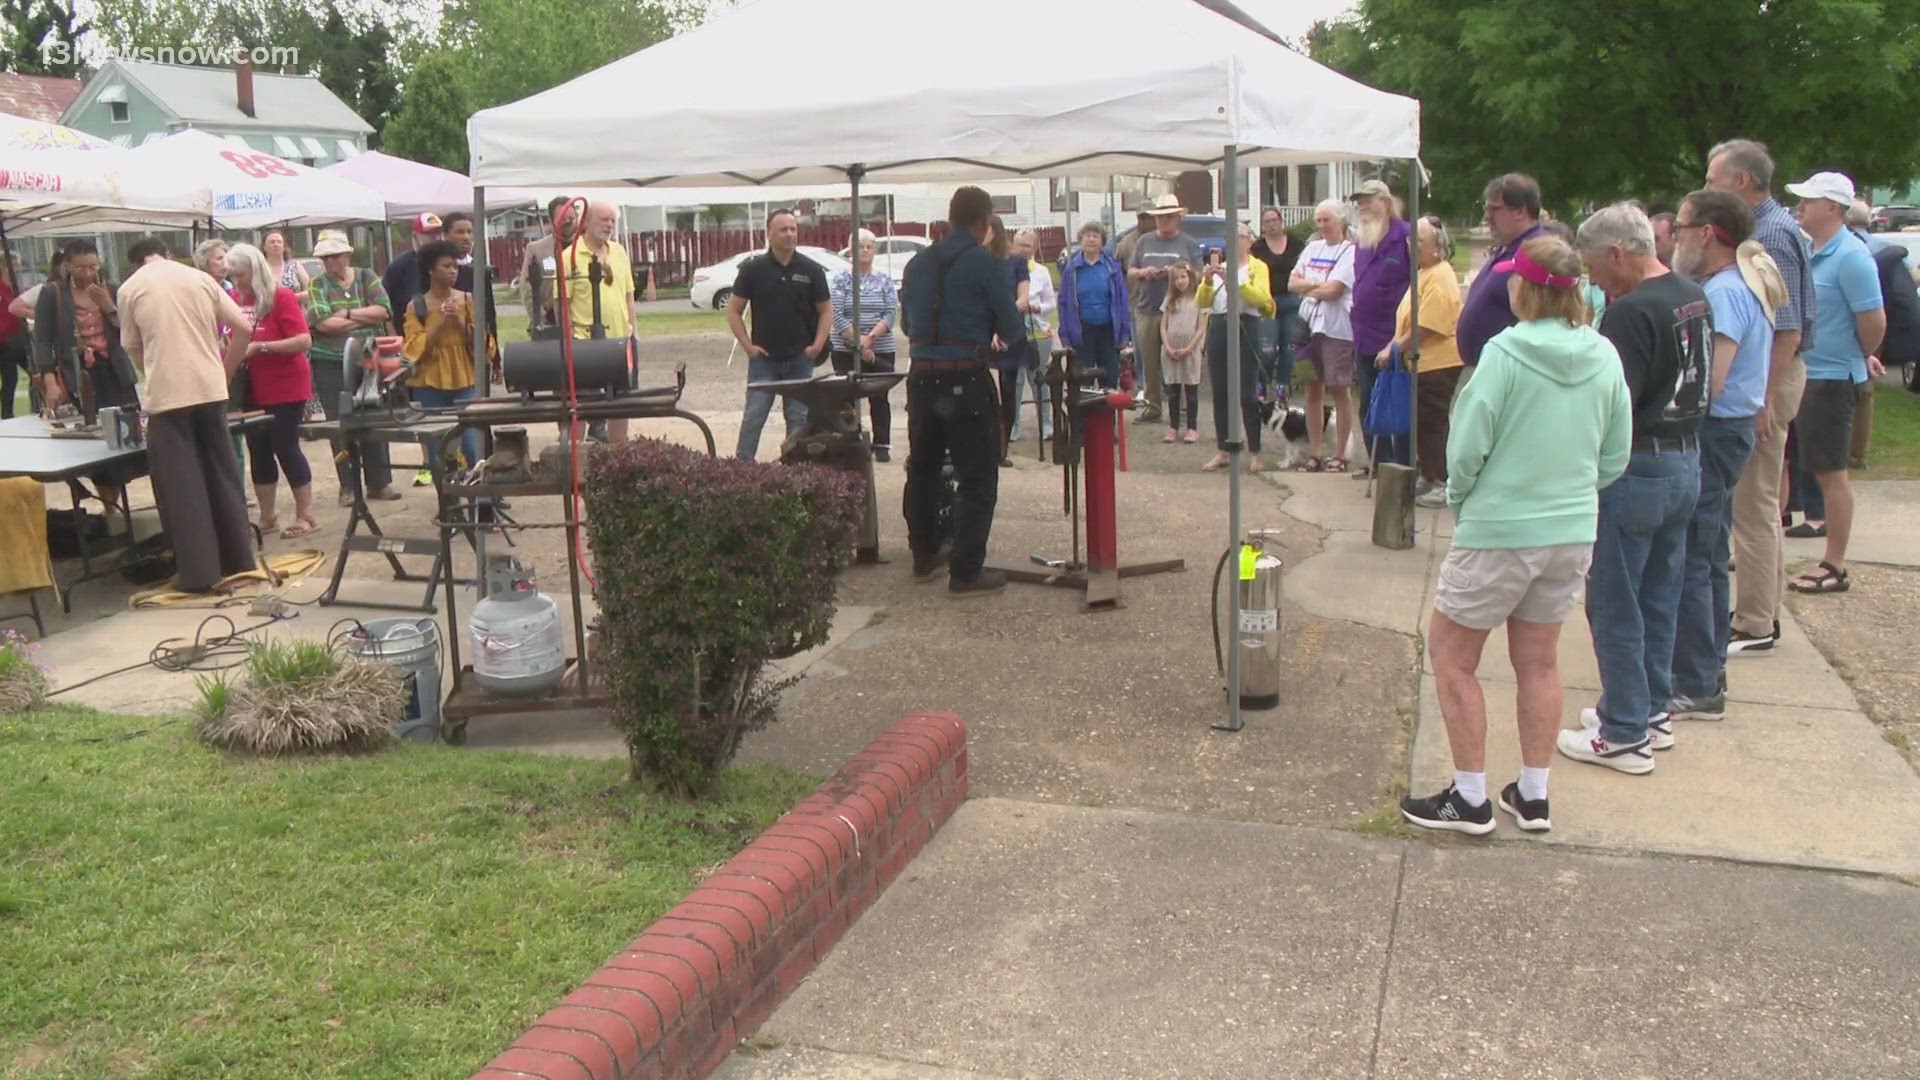 In Newport News, people turned guns into garden tools. Participants were invited to hit a gun with a hammer.